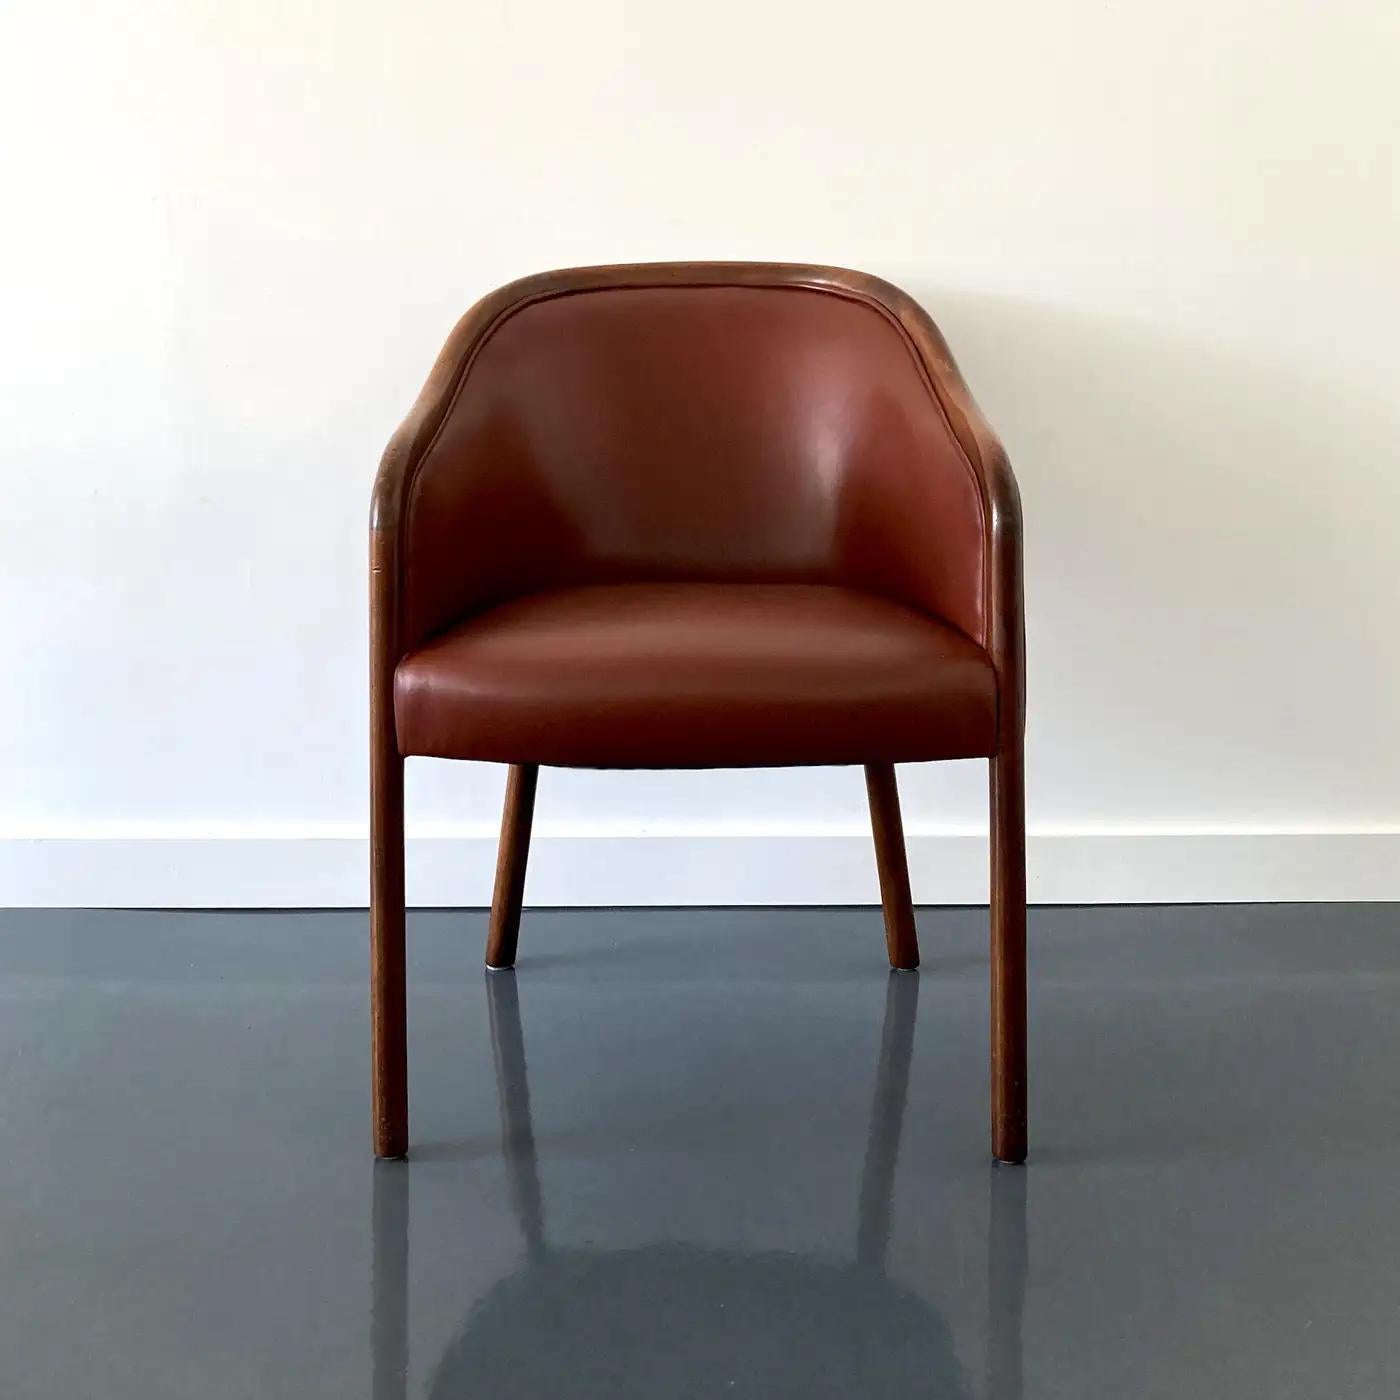 Designed by Ward Bennett for Brickel Associates, elegant leather armchair. Made from ash wood and stained in a walnut finish, upholstered in burgundy leather. The chair is structurally sound and sturdy, some wear and scuffs to bentwood arms. Sold as